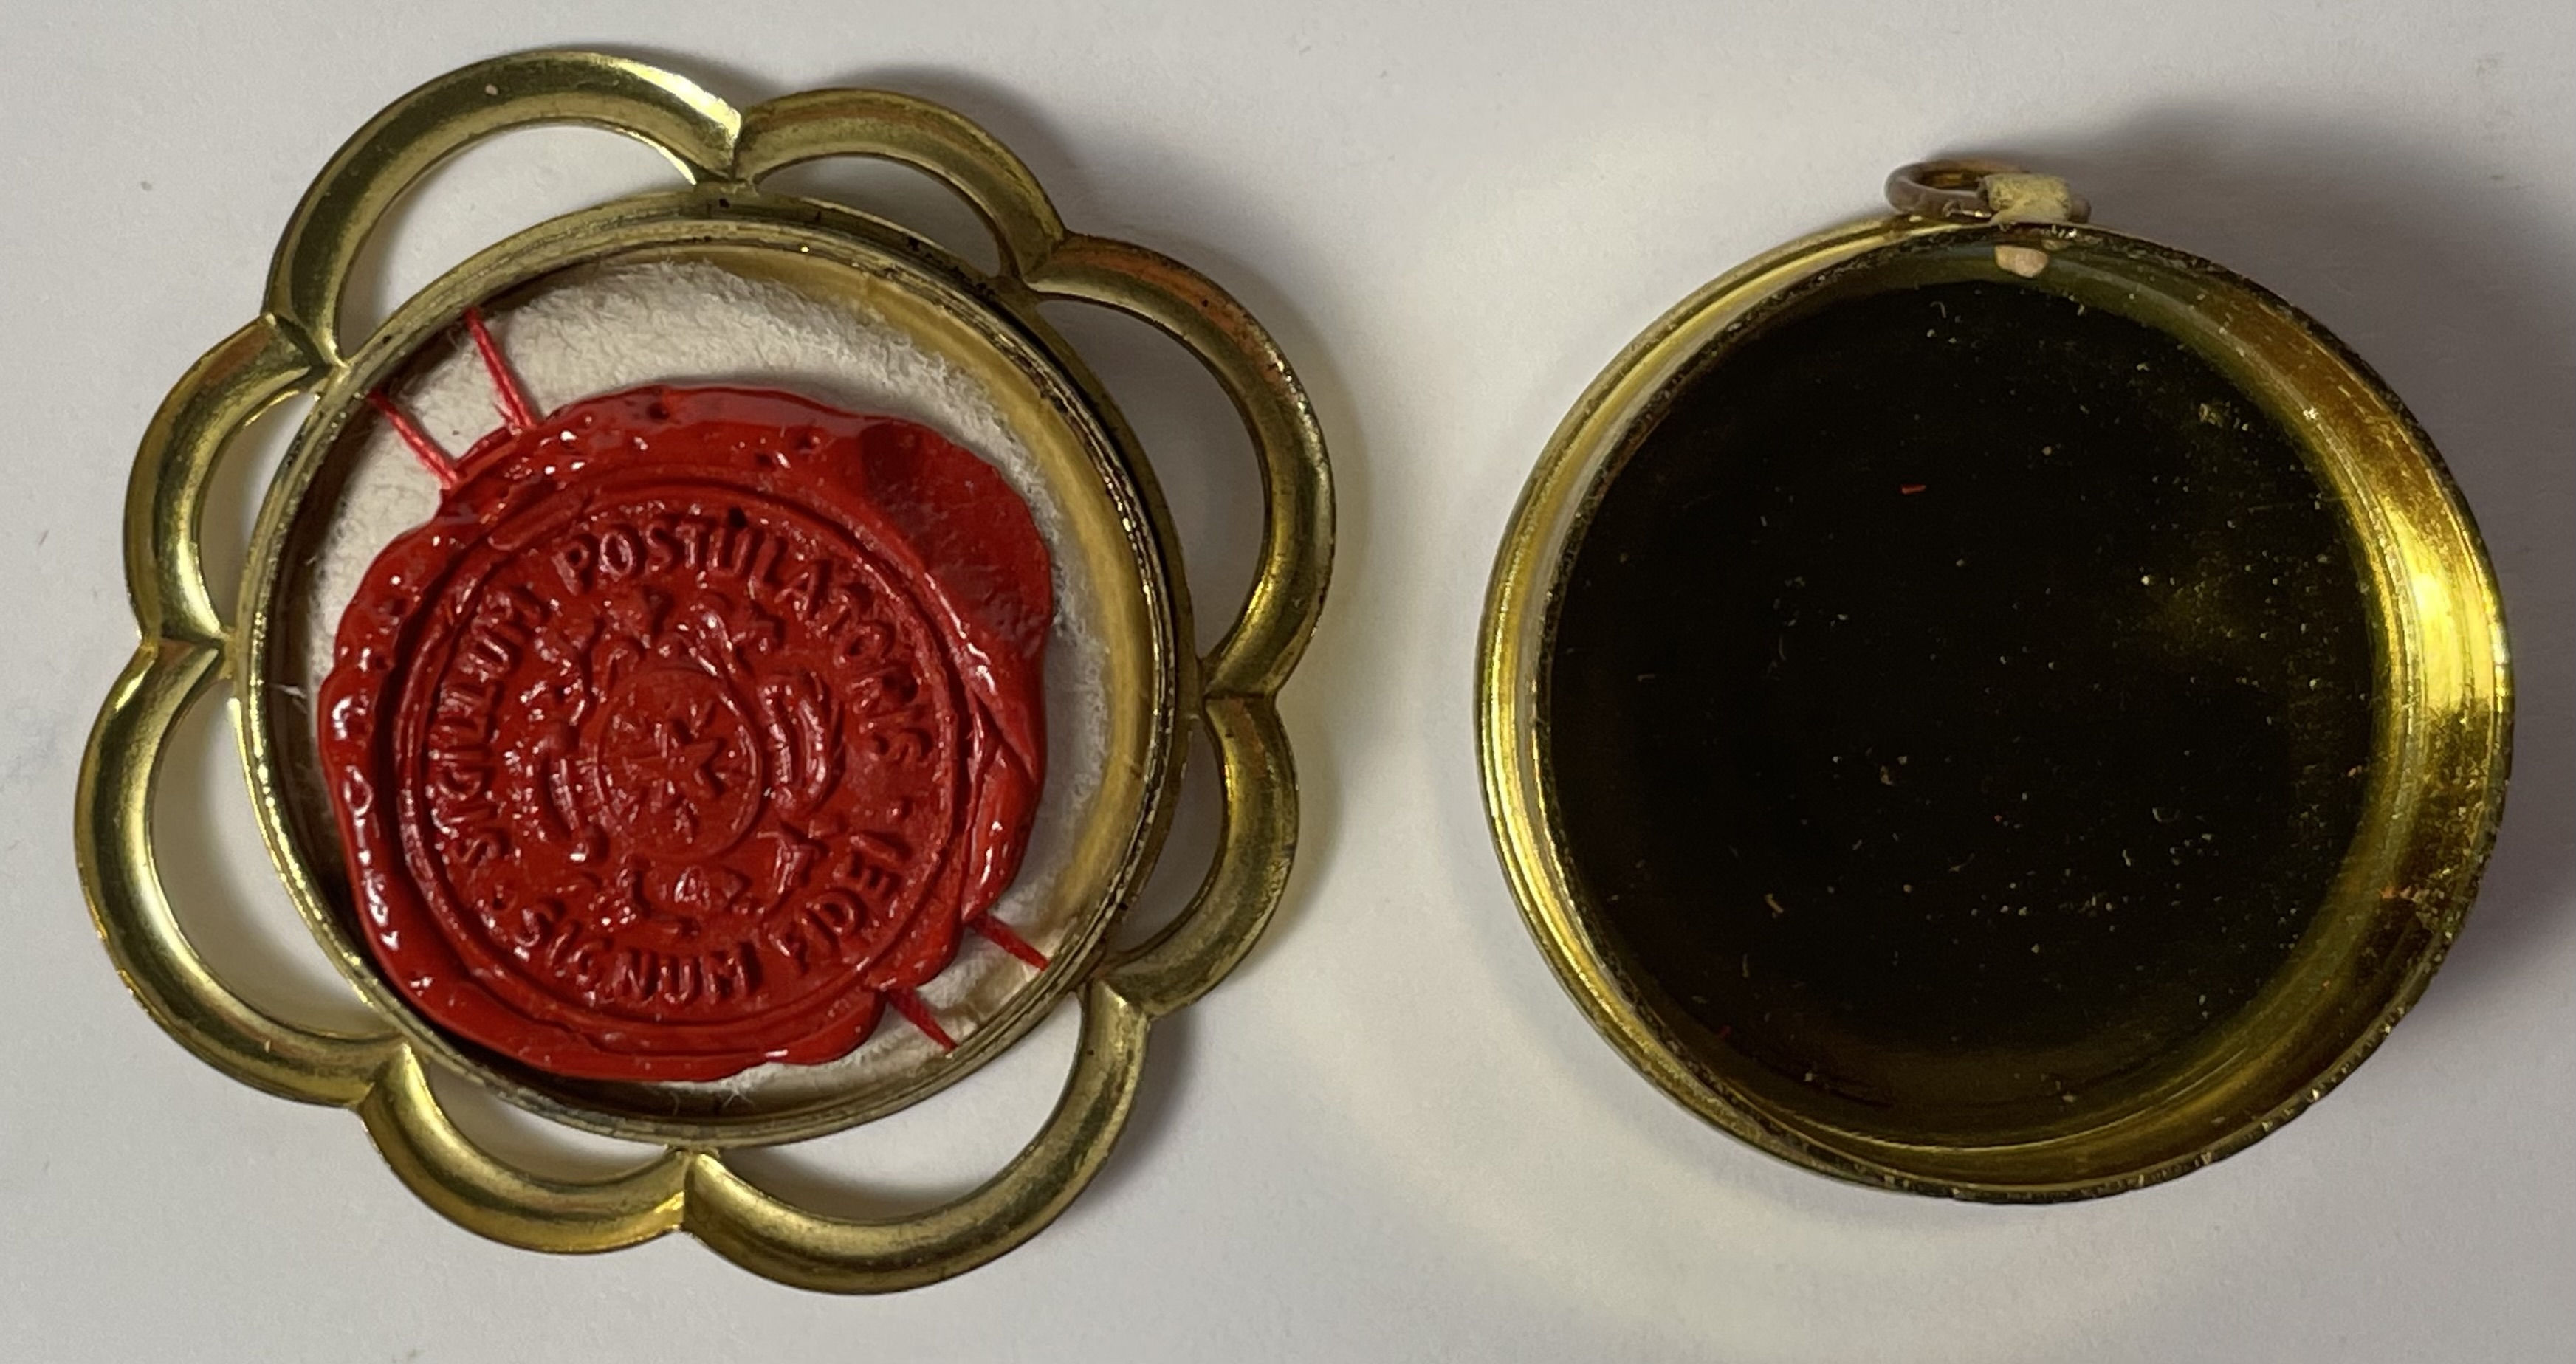 Unfolding the Mysteries of Sealing Wax and Wafers – A Victorian Passage